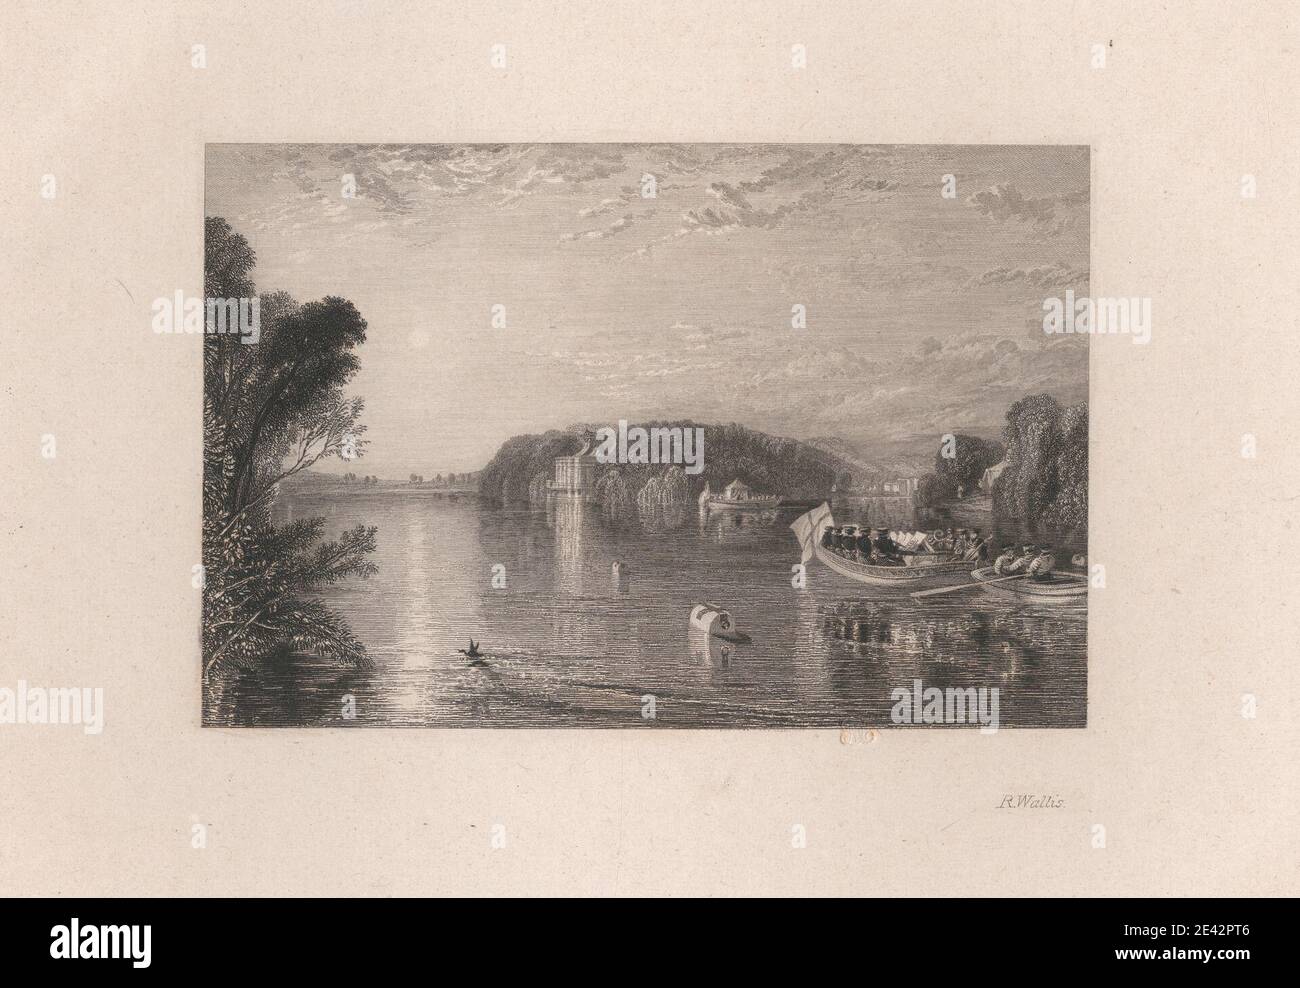 Robert Wallis, 1794â€“1878, British, Virginia Water. No. II, 1826-1837. Line engraving, engraver's proof on moderately thick, slightly textured, cream, wove paper. Stock Photo